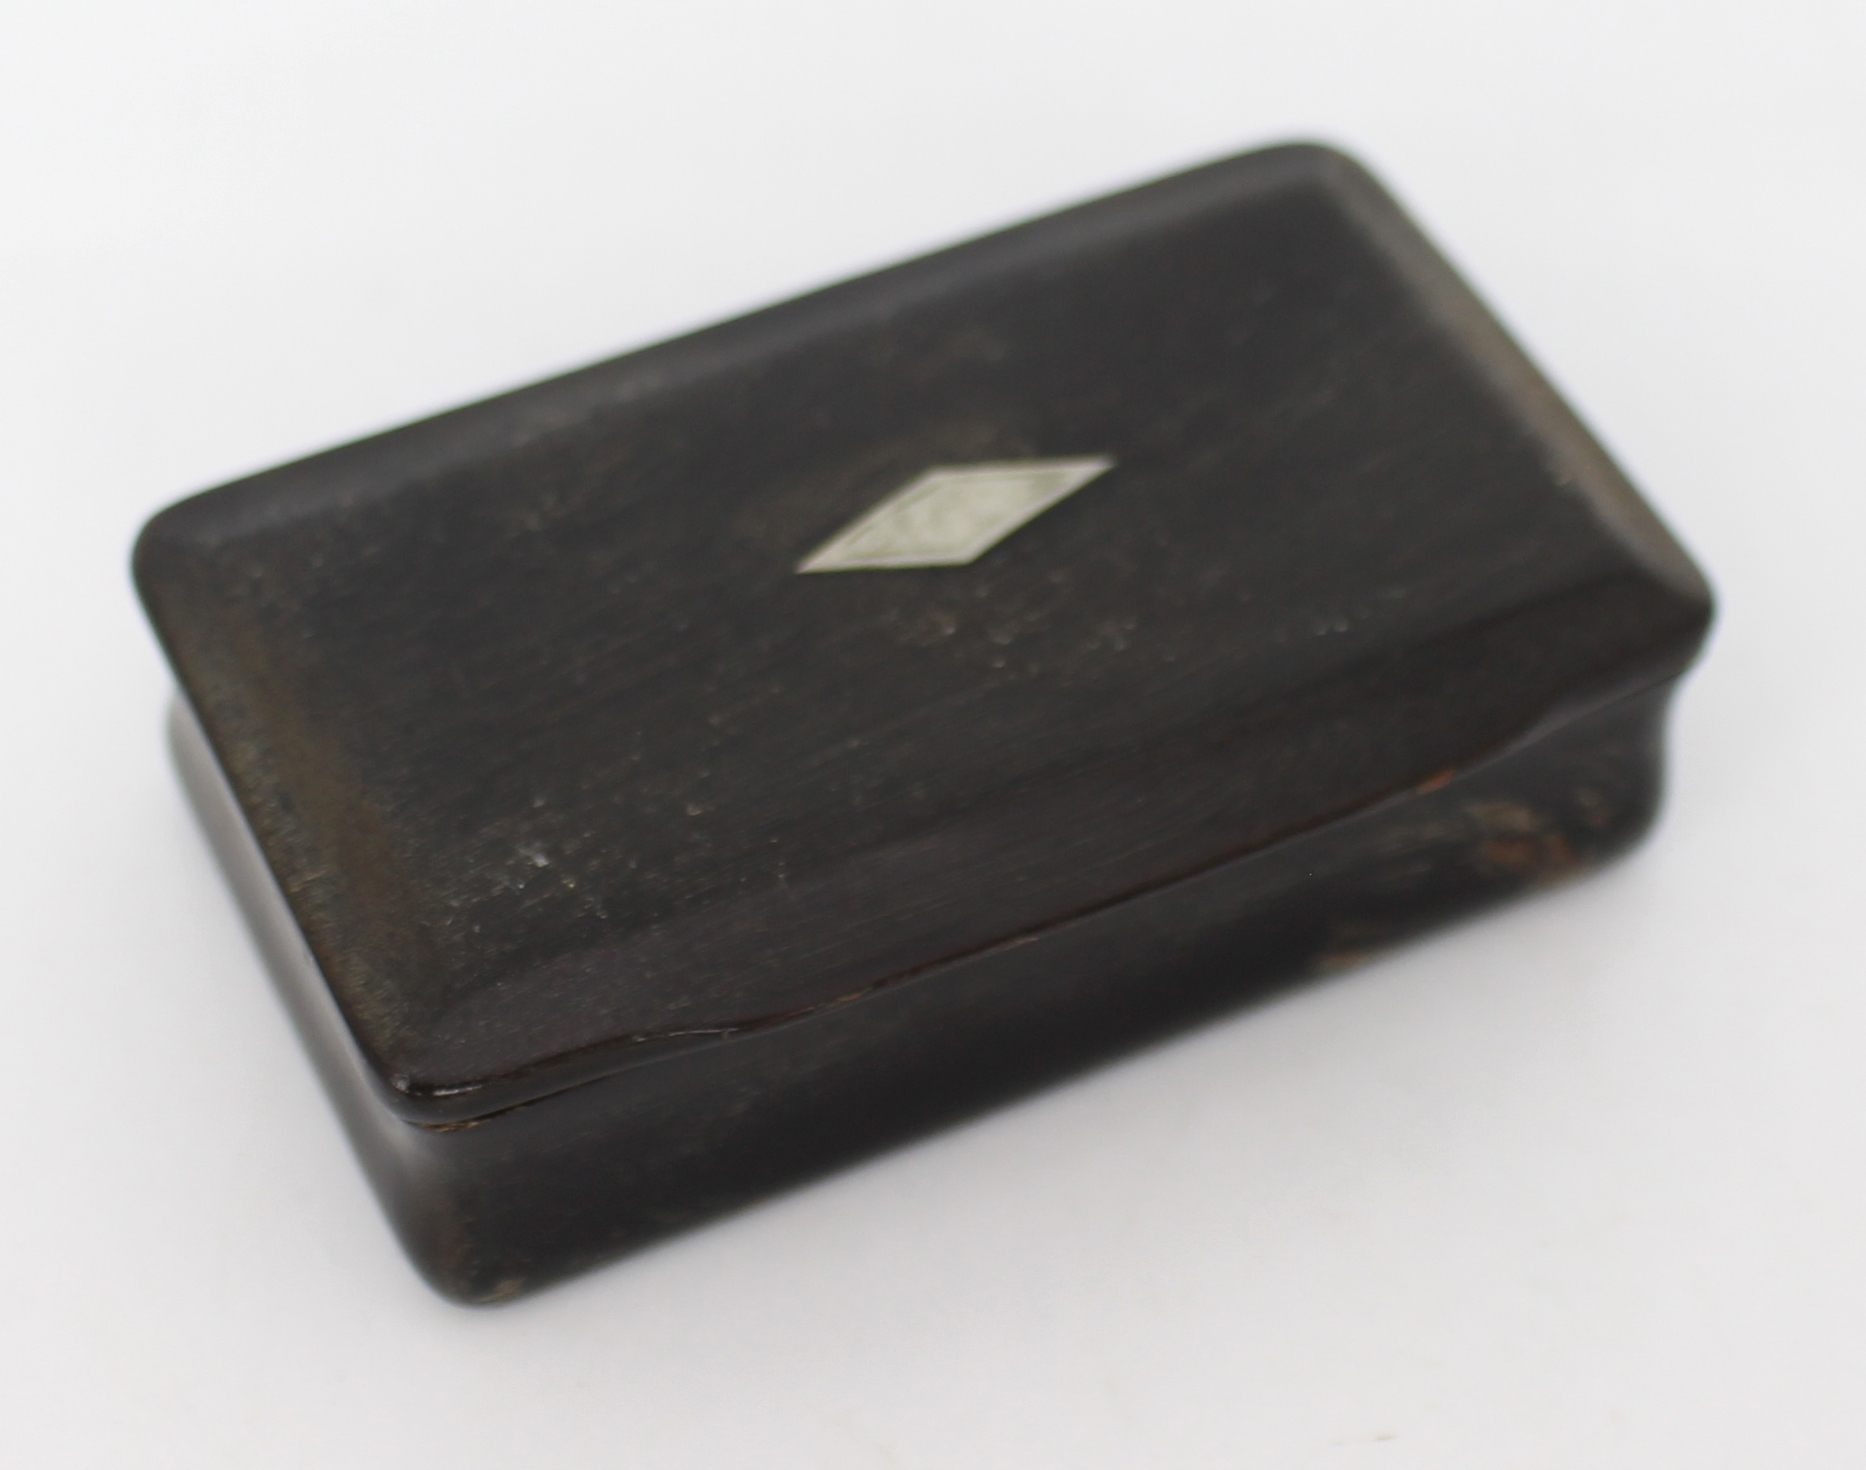 Horn Snuff Box - Image 2 of 4